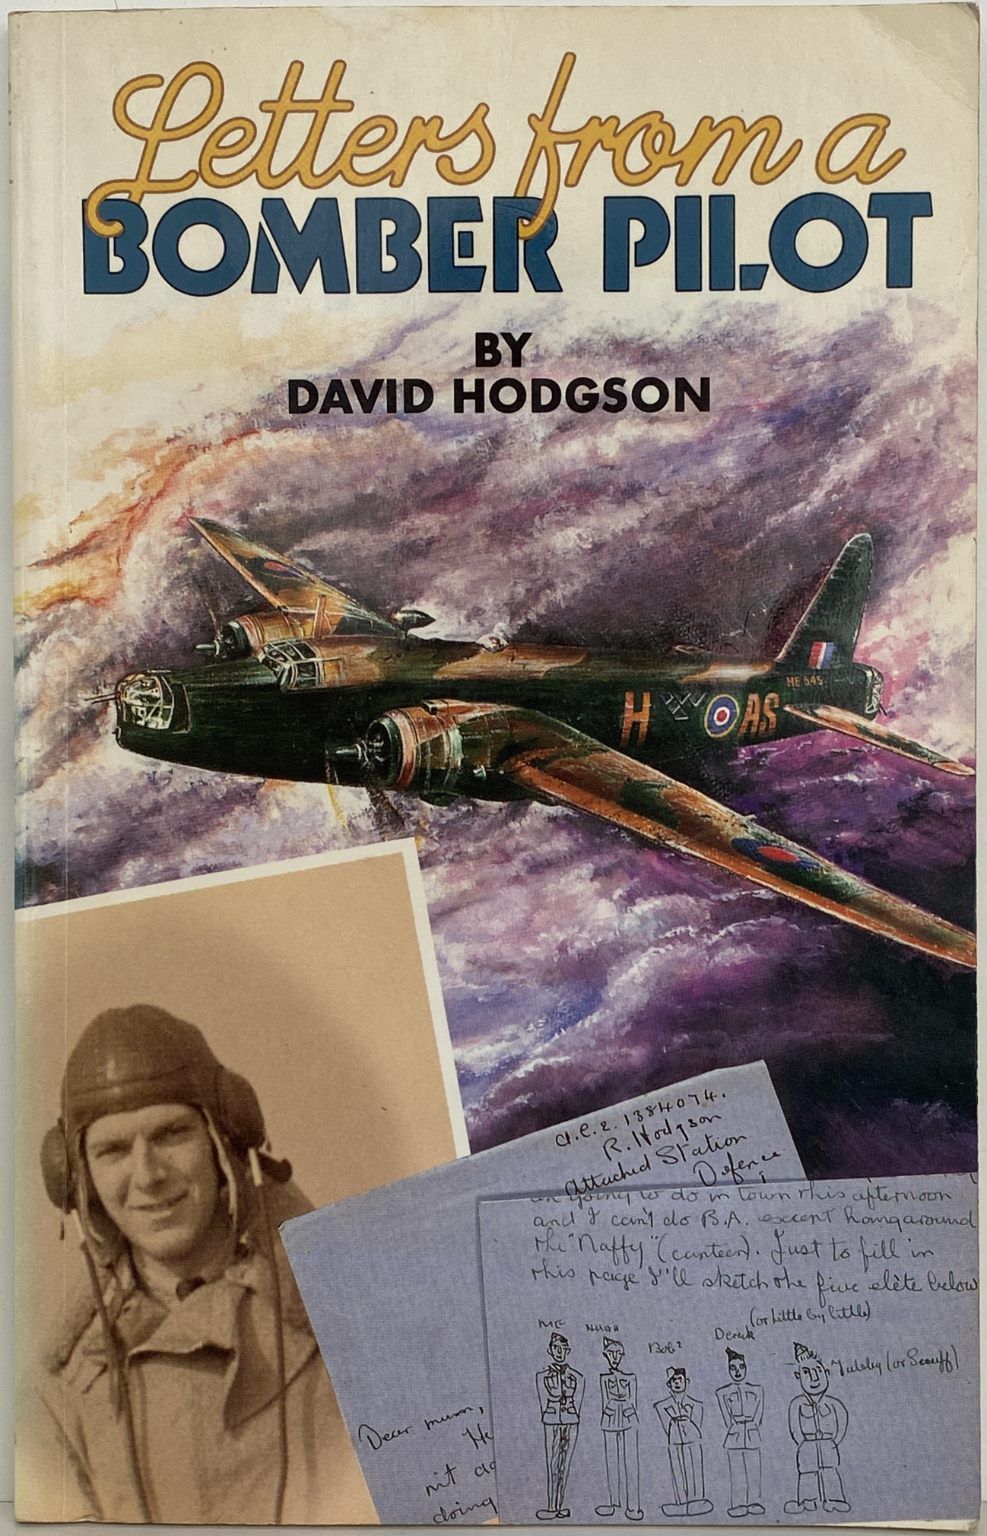 Letters from a BOMBER PILOT